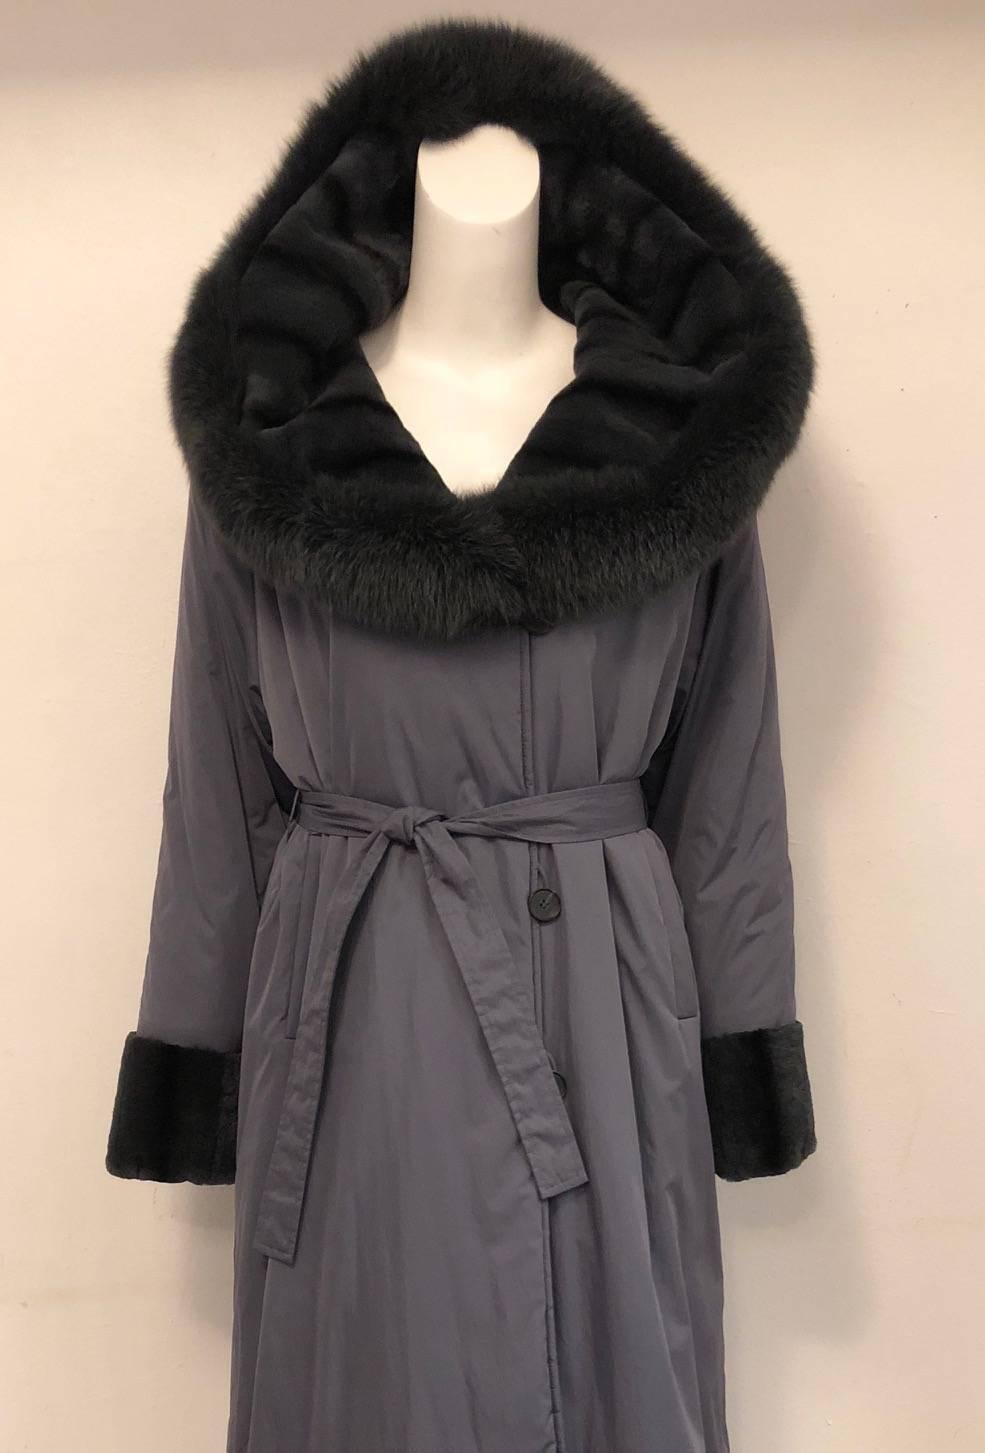 Alluring Argjrjou coat is expertly crafted in Canada using only the finest materials.  Features maxi length, raglan sleeves, durable, yet sophisticated, nylon exterior, two welt pockets and optional belt.  3-button closure secures the front. 